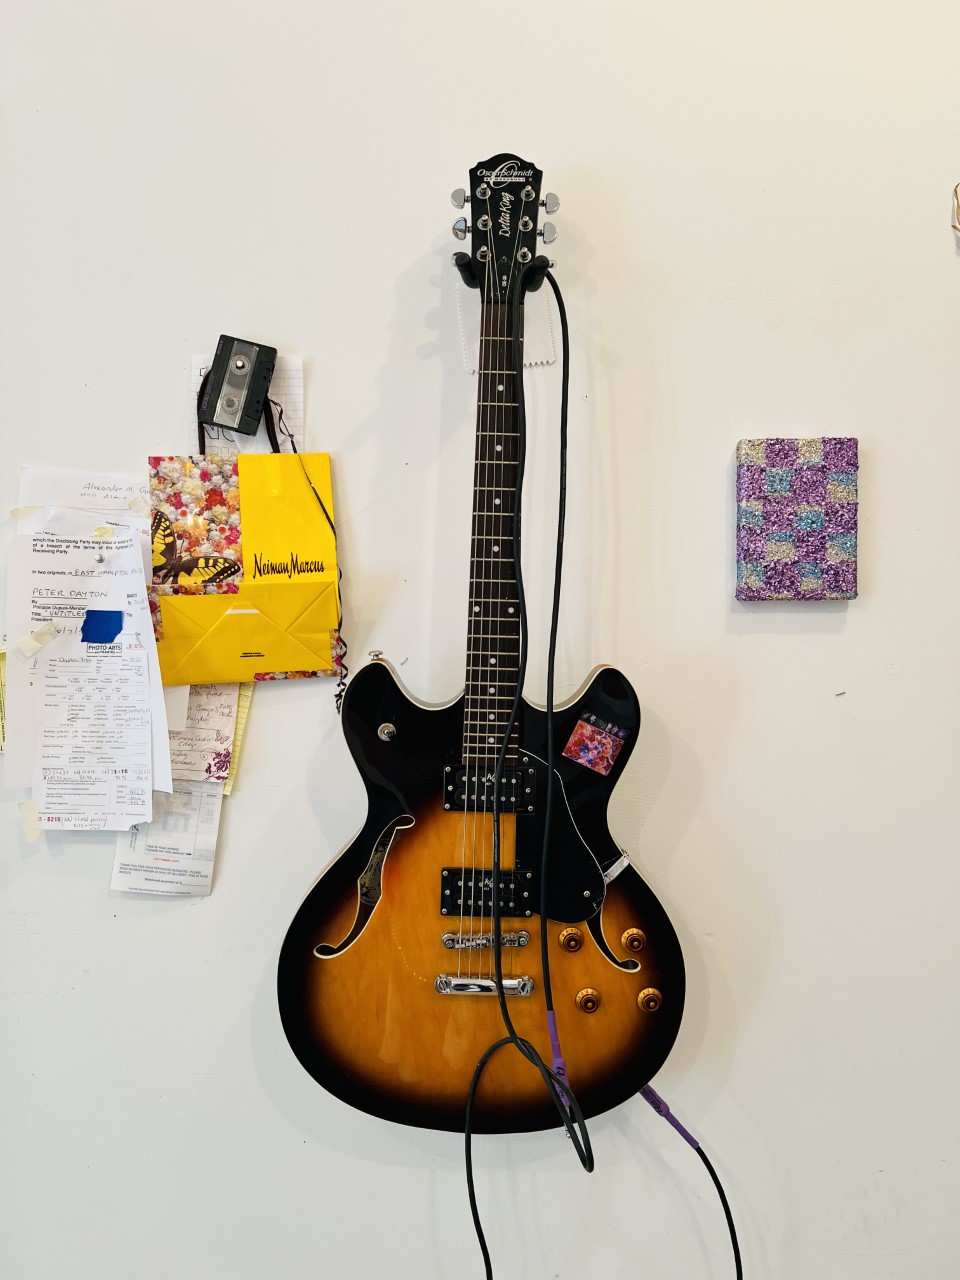 A guitar hanging on the wall by a small piece of art